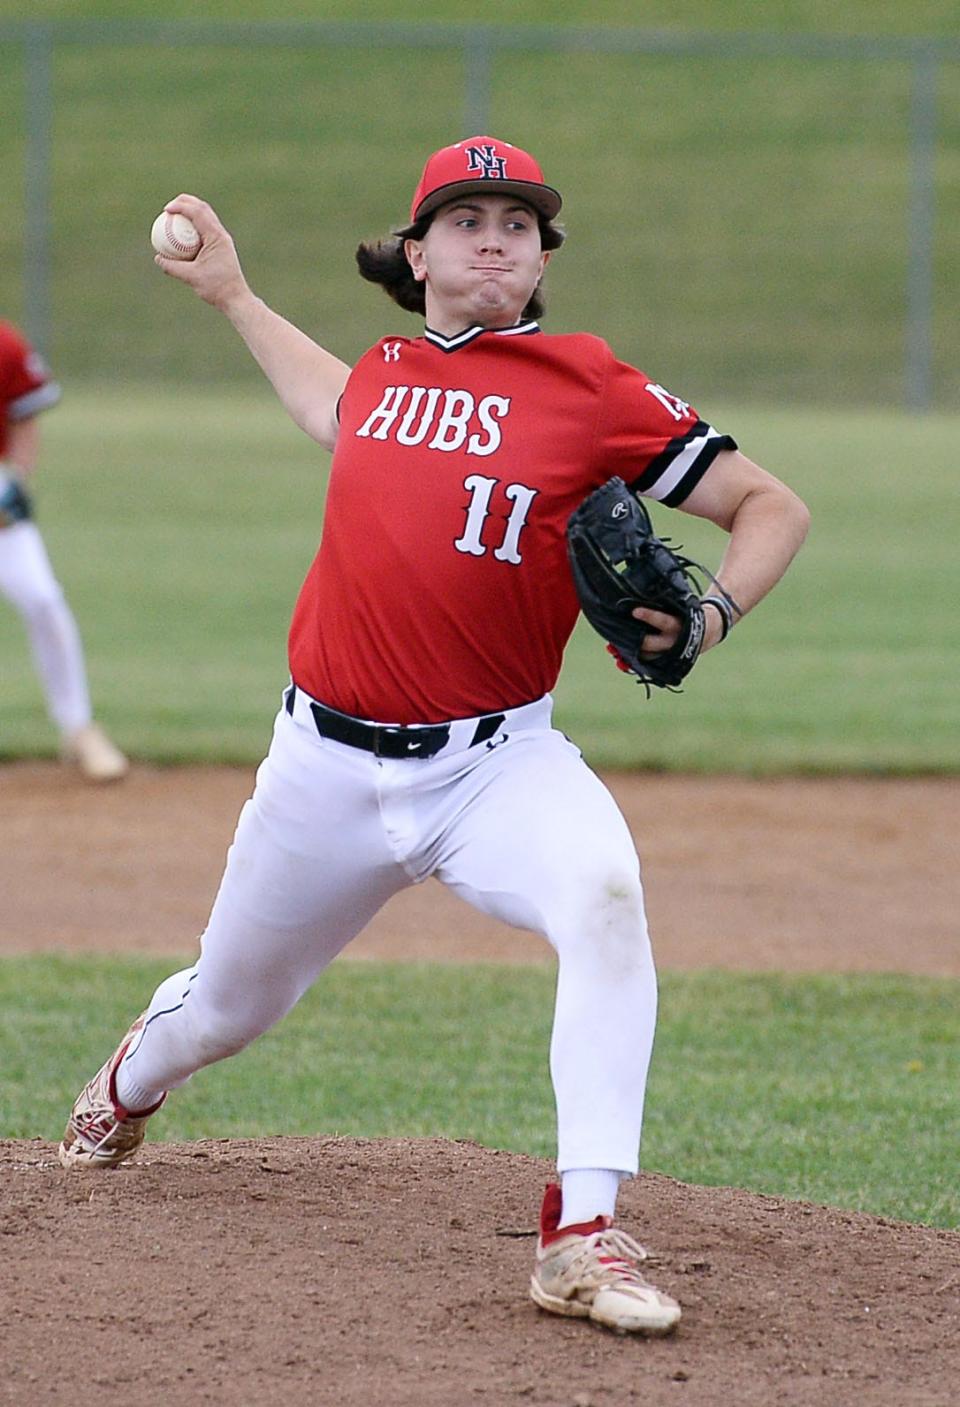 North Hagerstown's Henry Ortiz pitched a complete game in the Hubs' 12-2 win over South Hagerstown in the 3A West Region I quarterfinals.